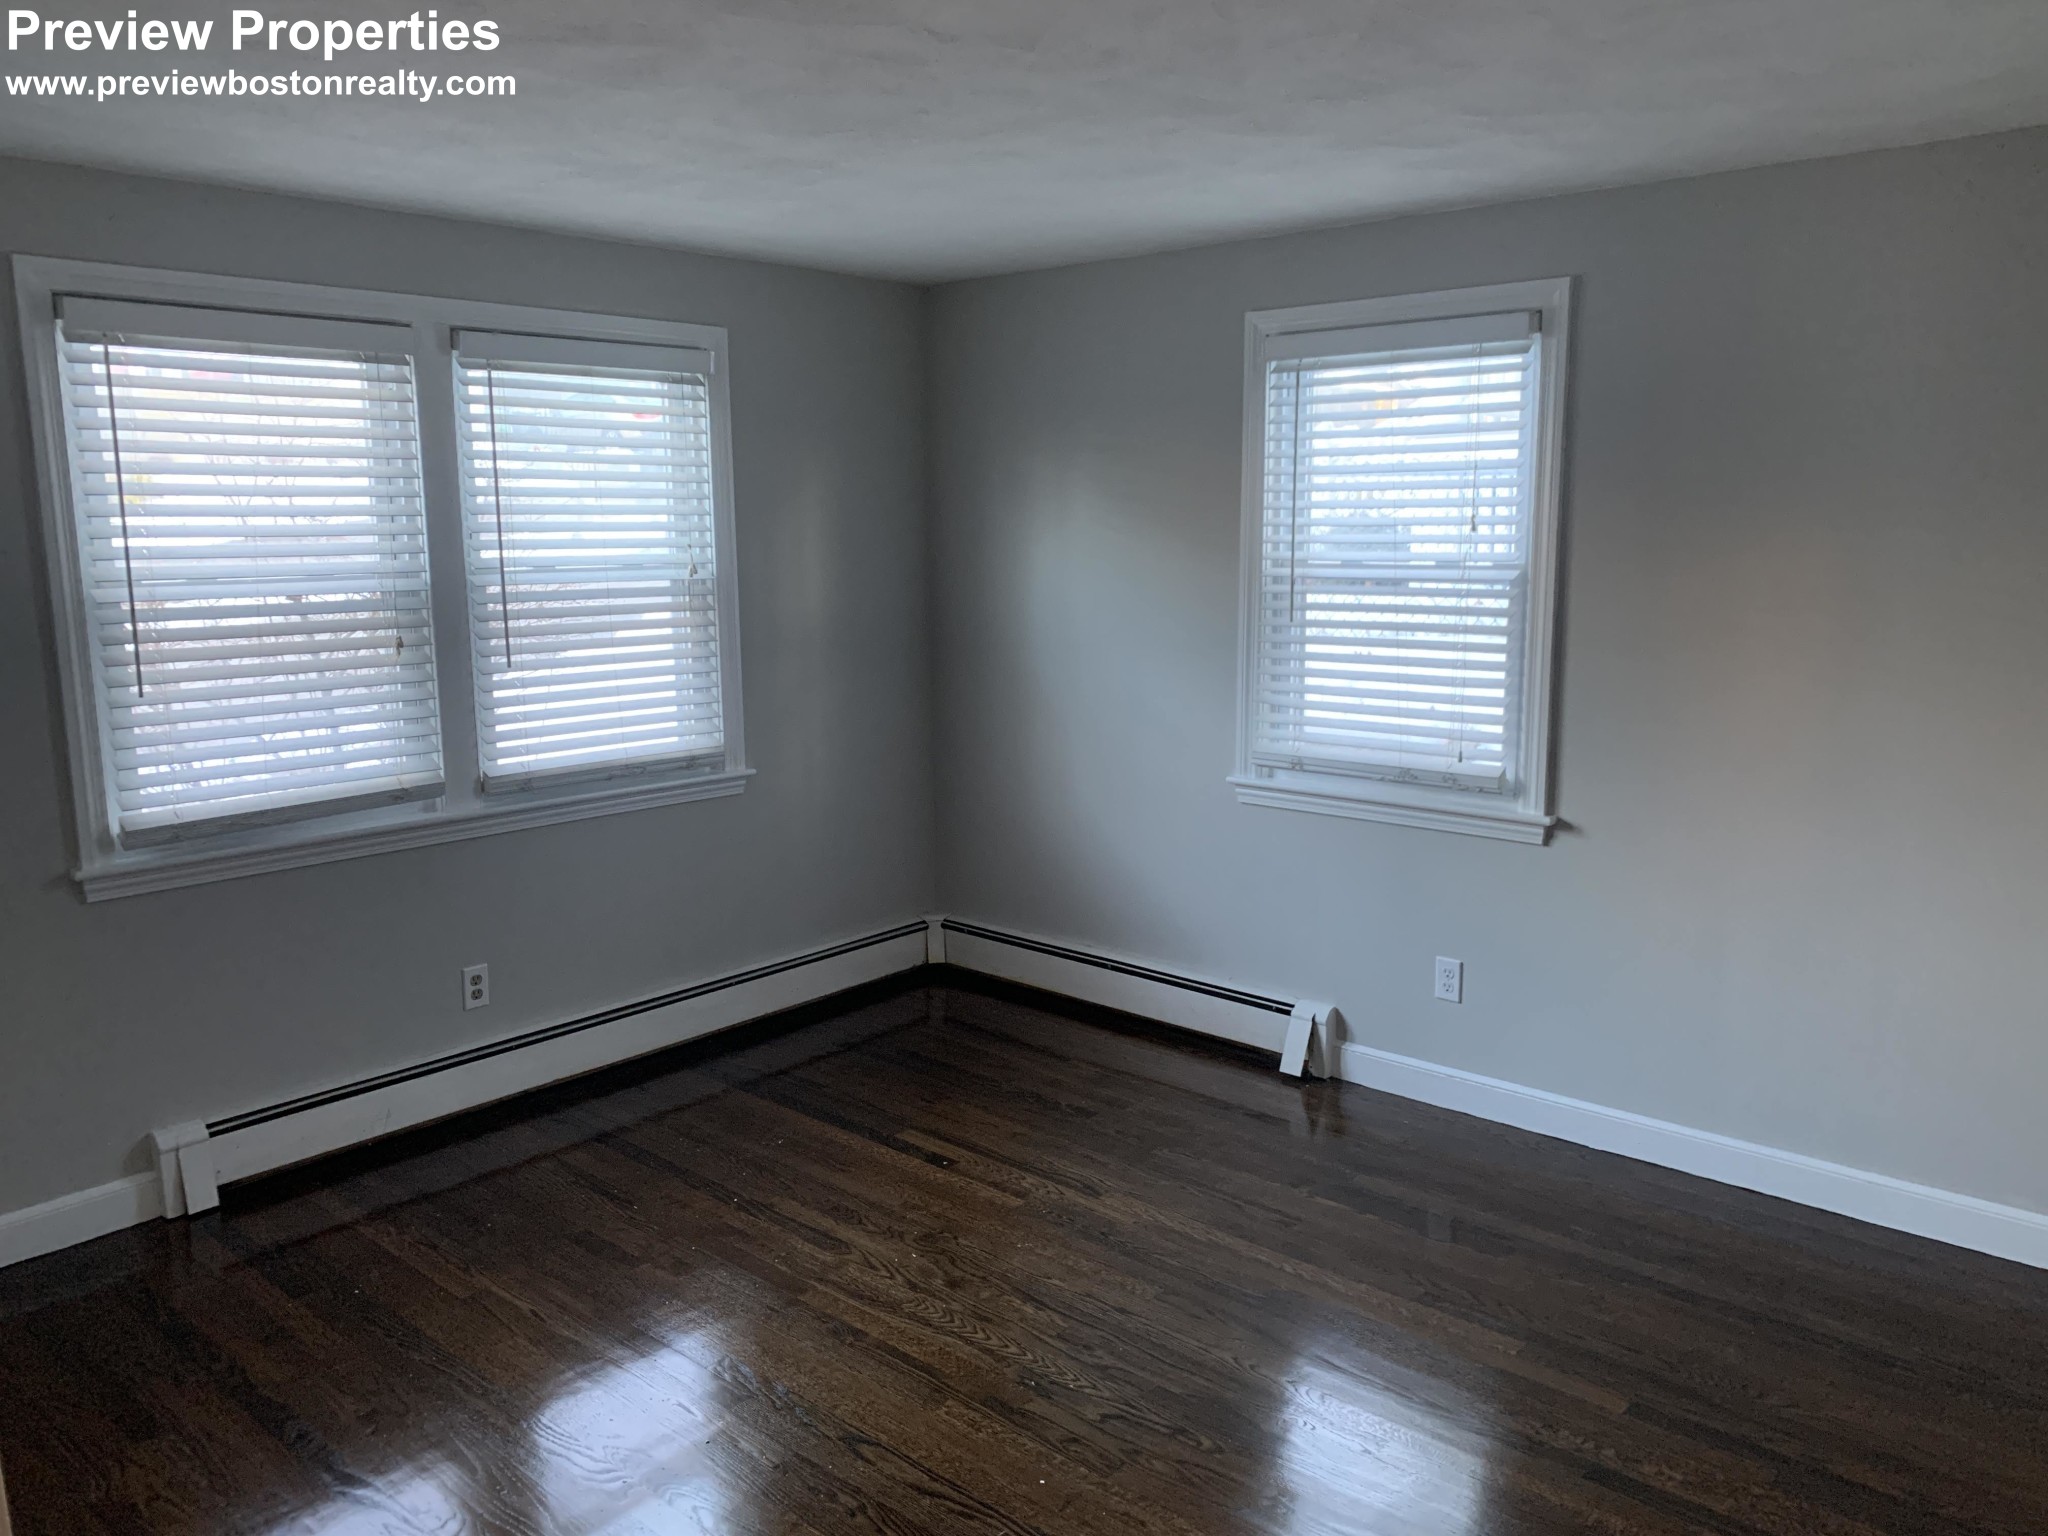 Photos of apartment on Warwick Rd.,Watertown MA 02472